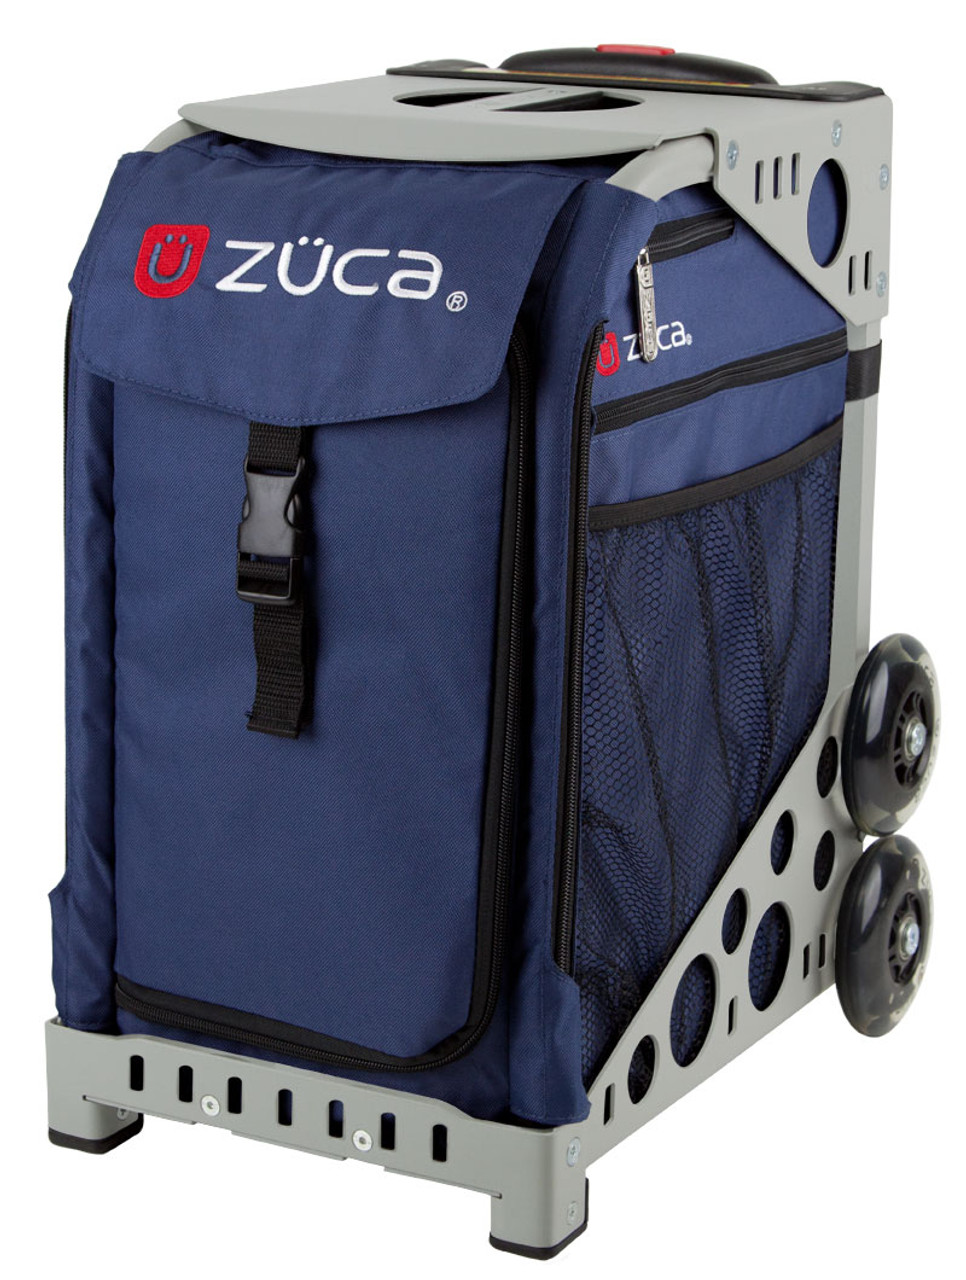 Zuca 18 Sport Bag - SK8 Black (Limited Edition) with 2 Small